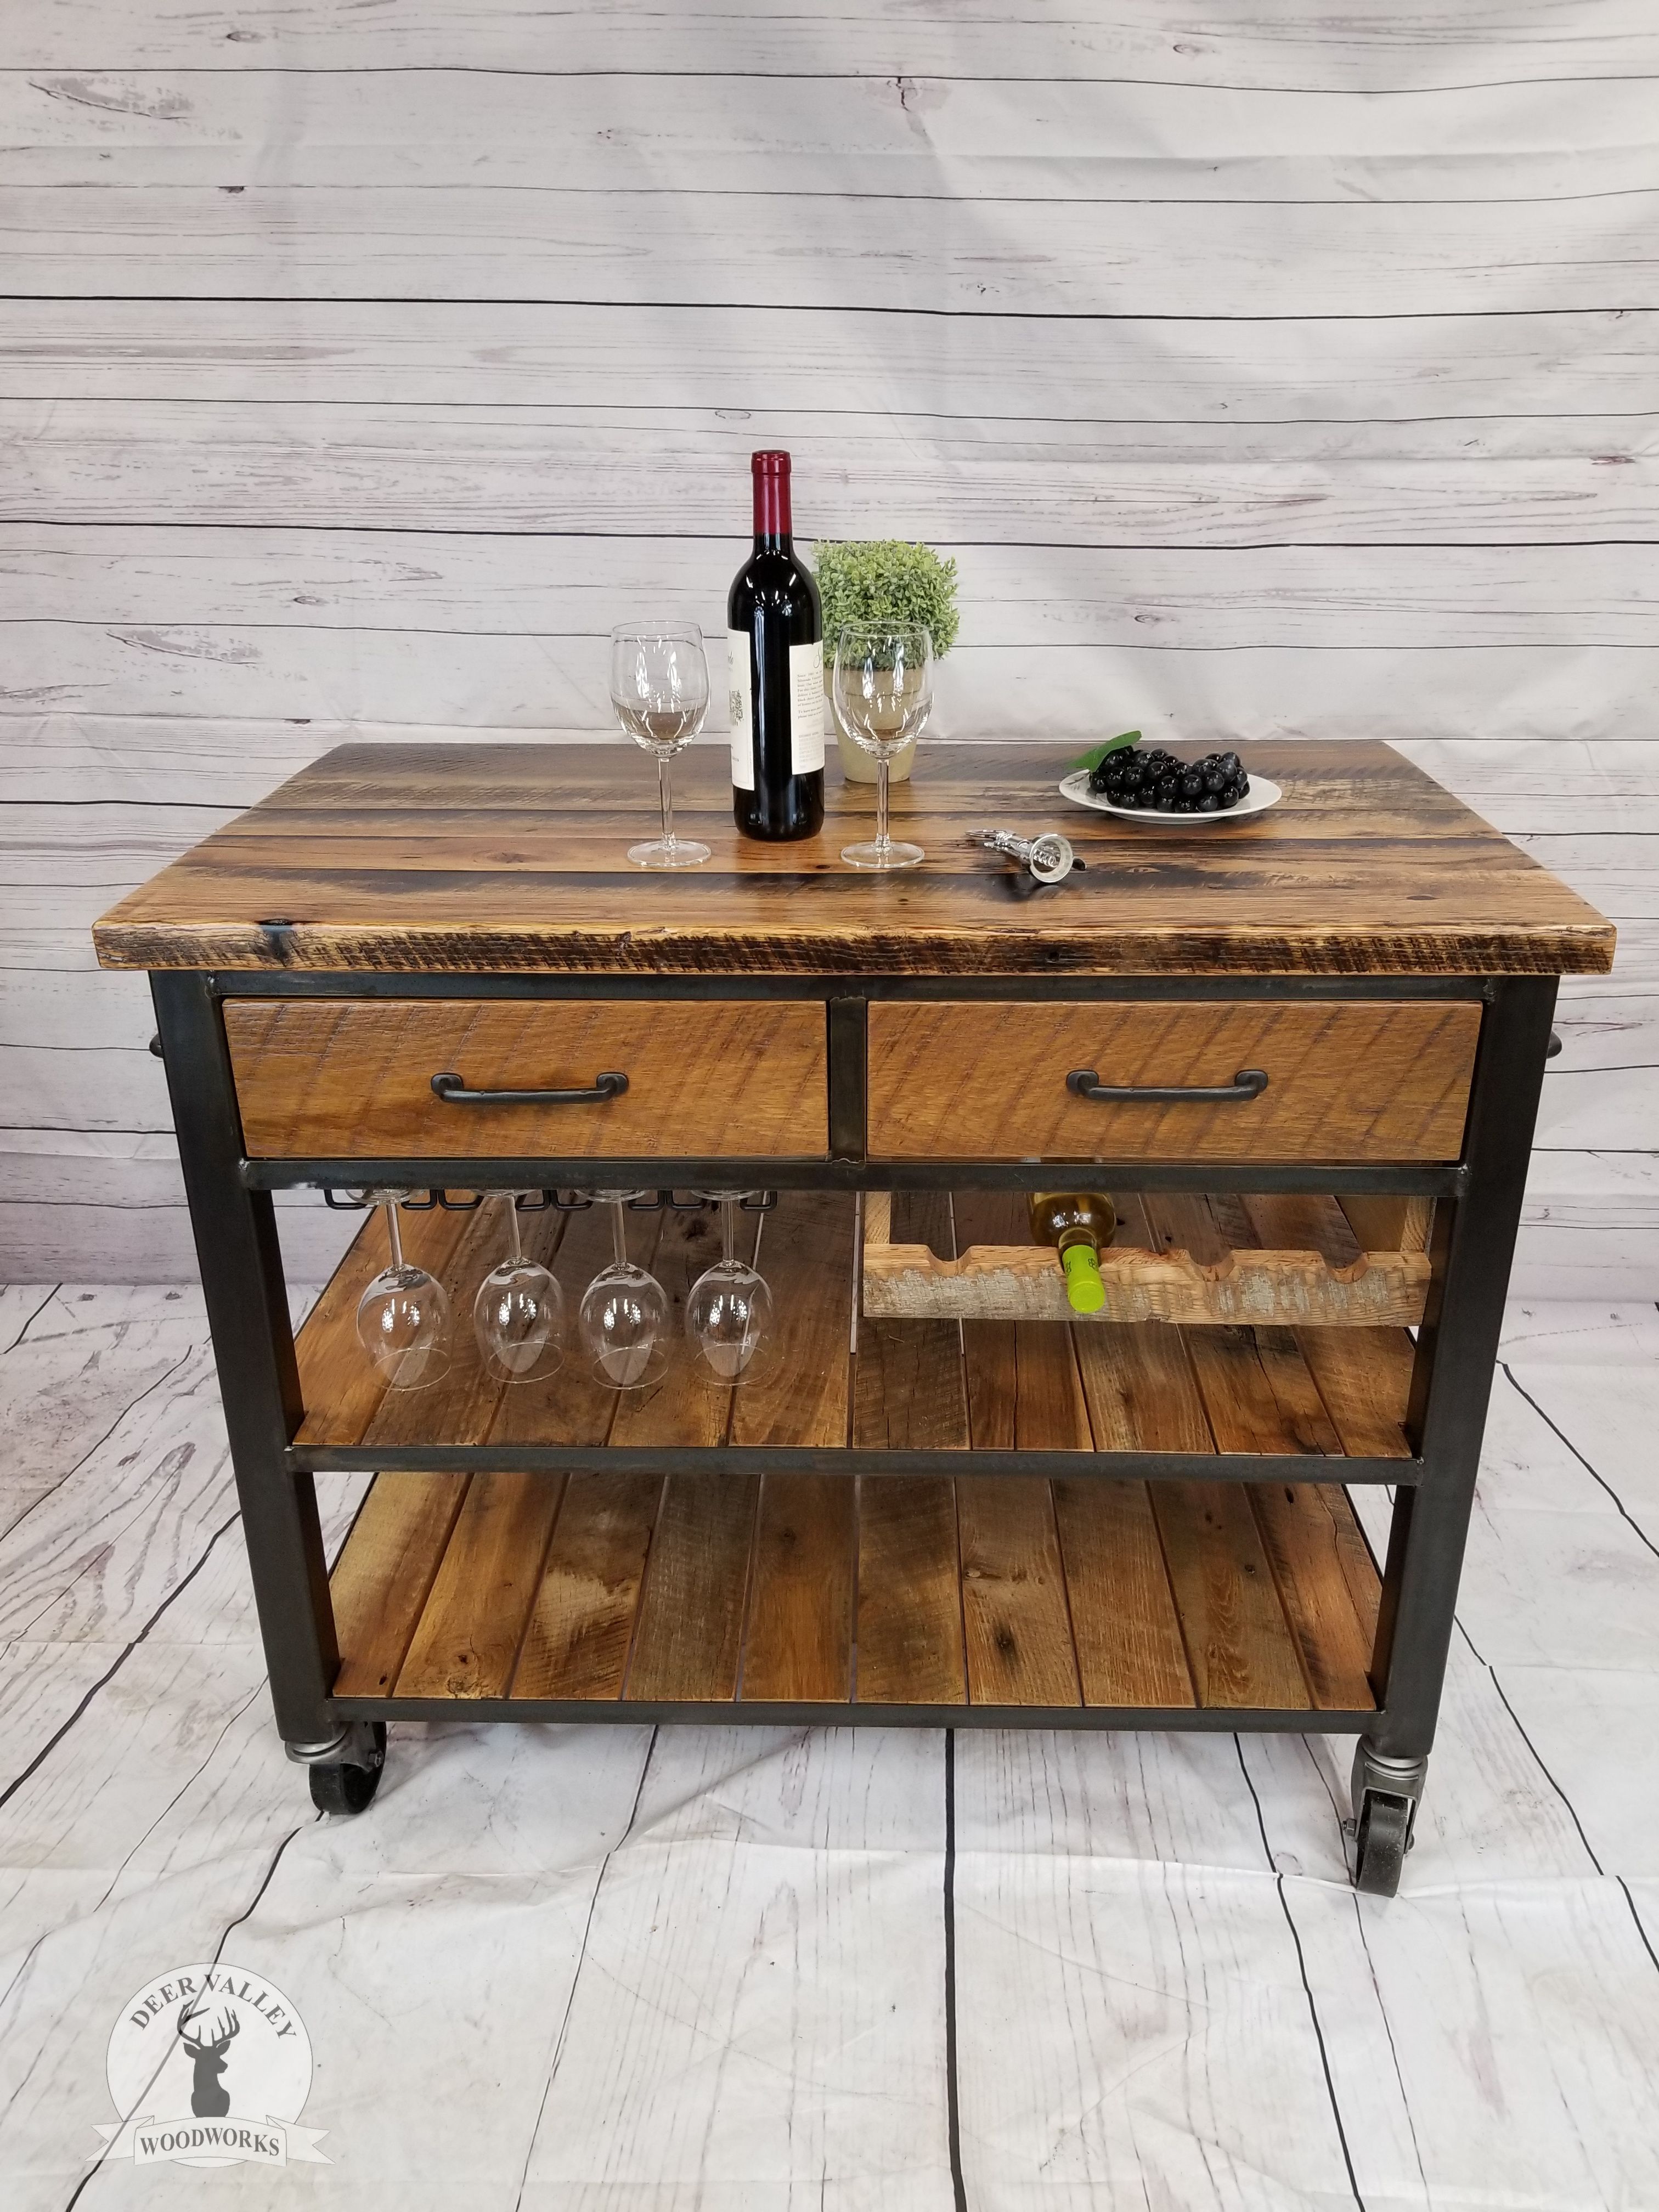 Sudden descent Nylon settlement Buy Hand Made Reclaimed Wood Bar Cart, Rustic Kitchen Island, Beverage  Serving Cart, made to order from Deer Valley Woodworks | CustomMade.com